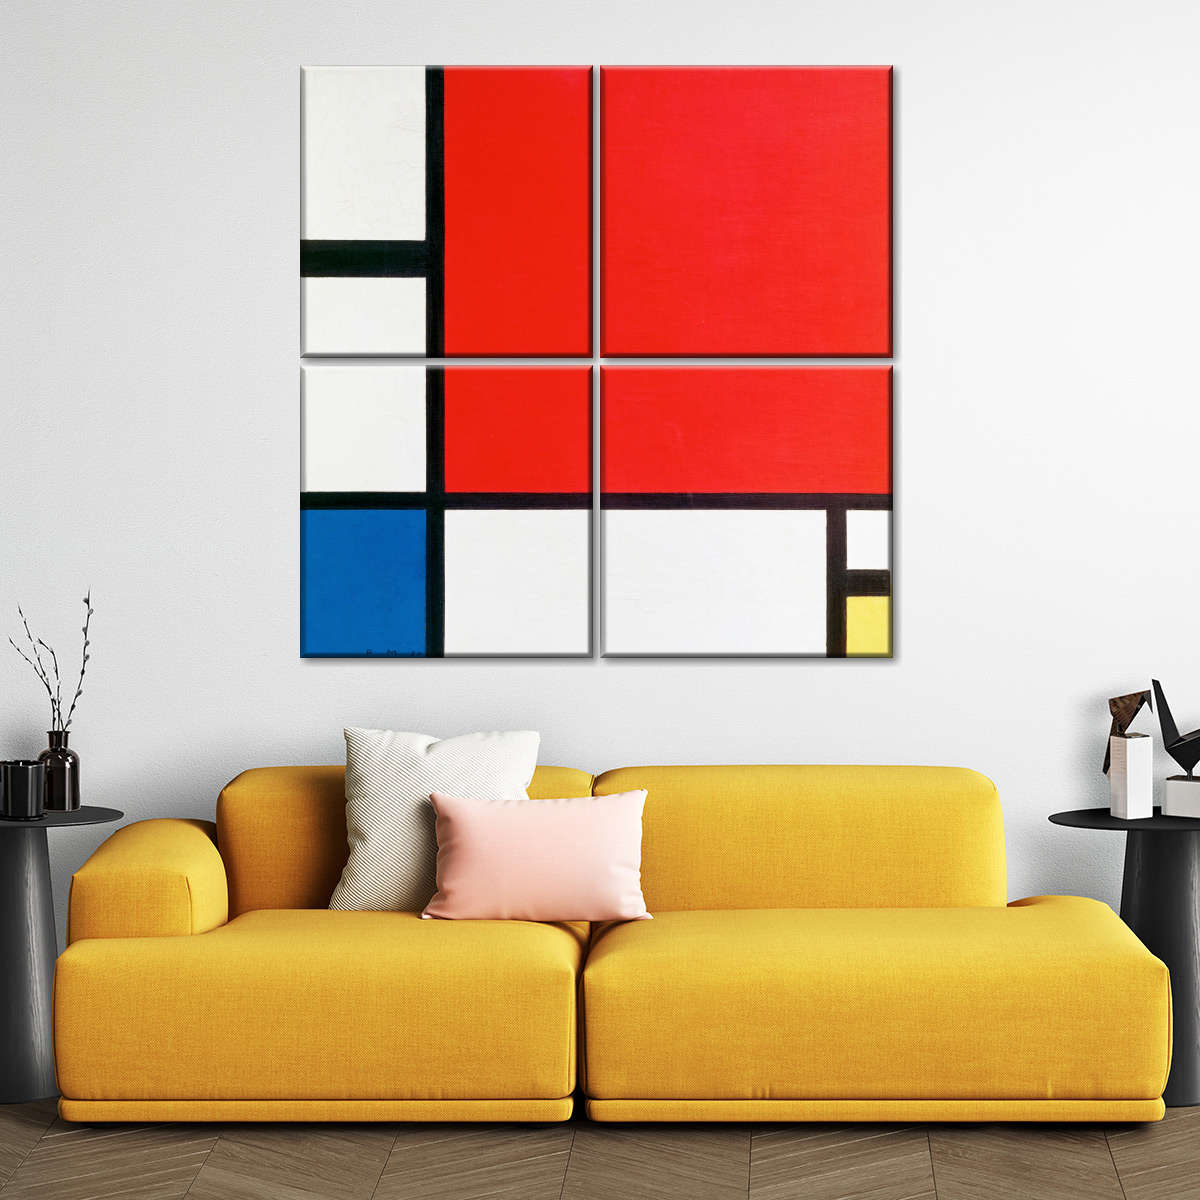 Composition with Red, Blue and Yellow